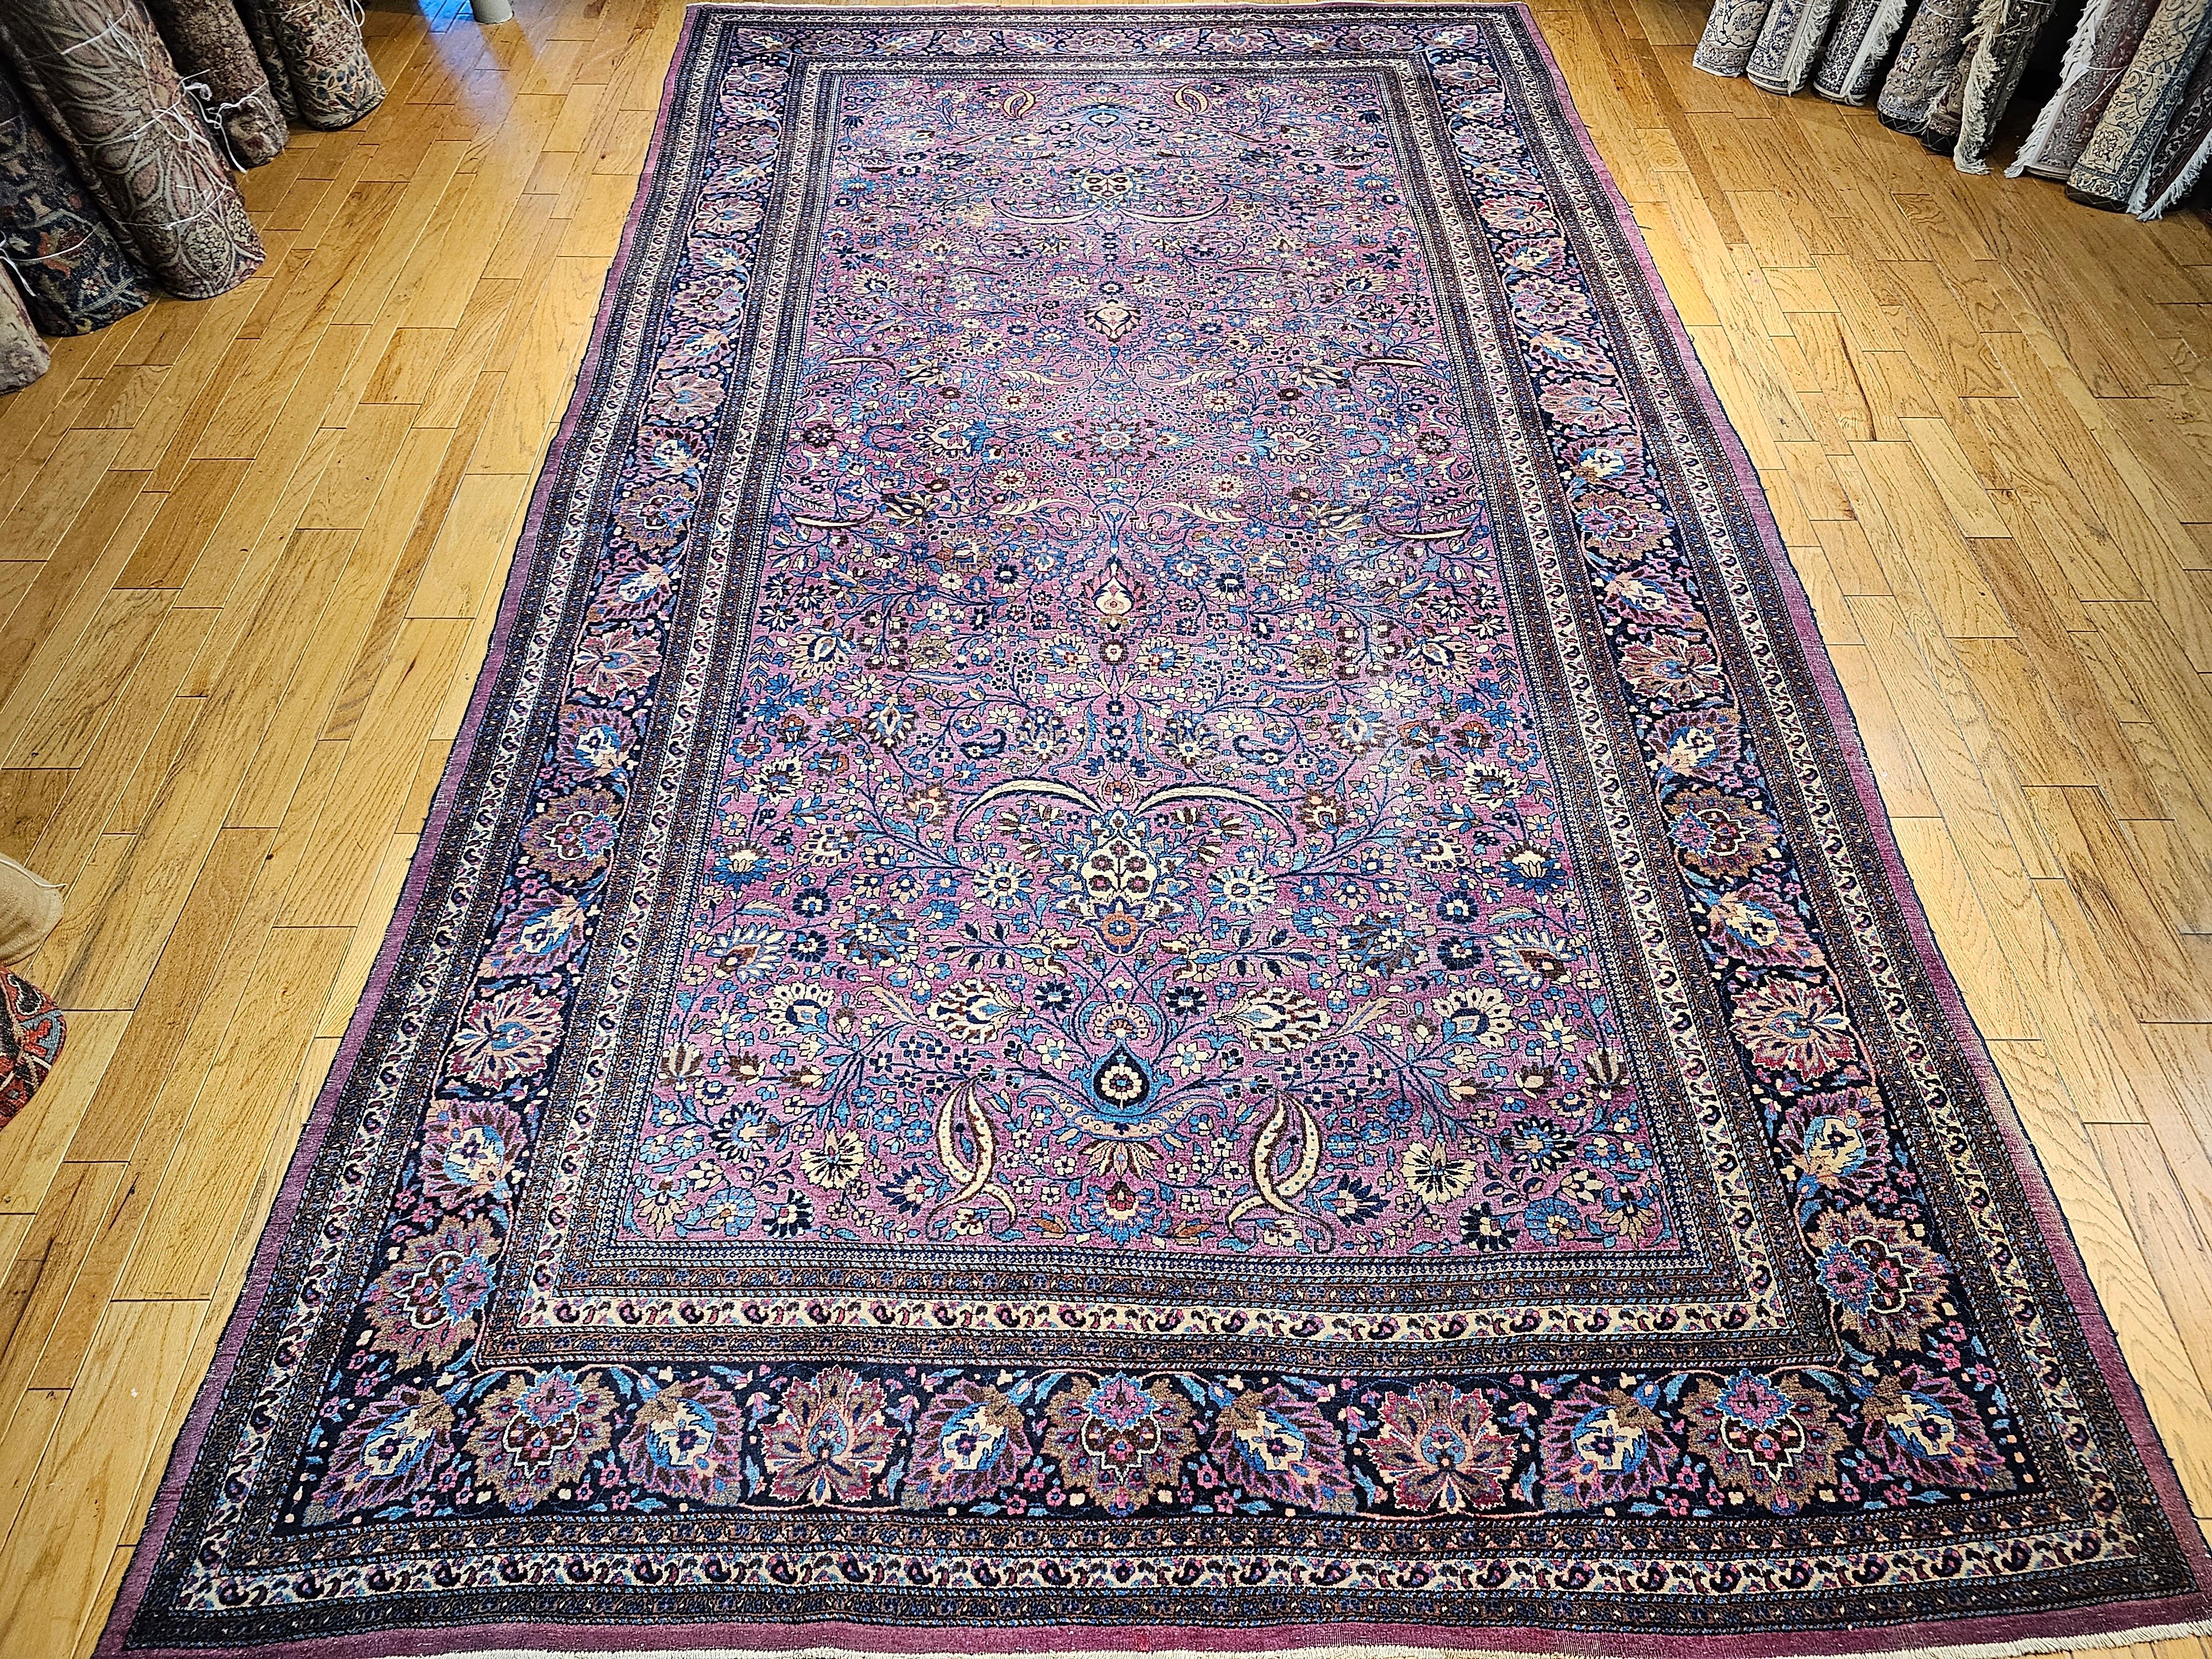 This magnificent deep purple color antique Persian Khorassan rug in an allover pattern is a masterpiece of breathtaking splendor. IThis tone of deep purple or eggplant color is very rare and extremely attractive and desirable.   The rich purplish